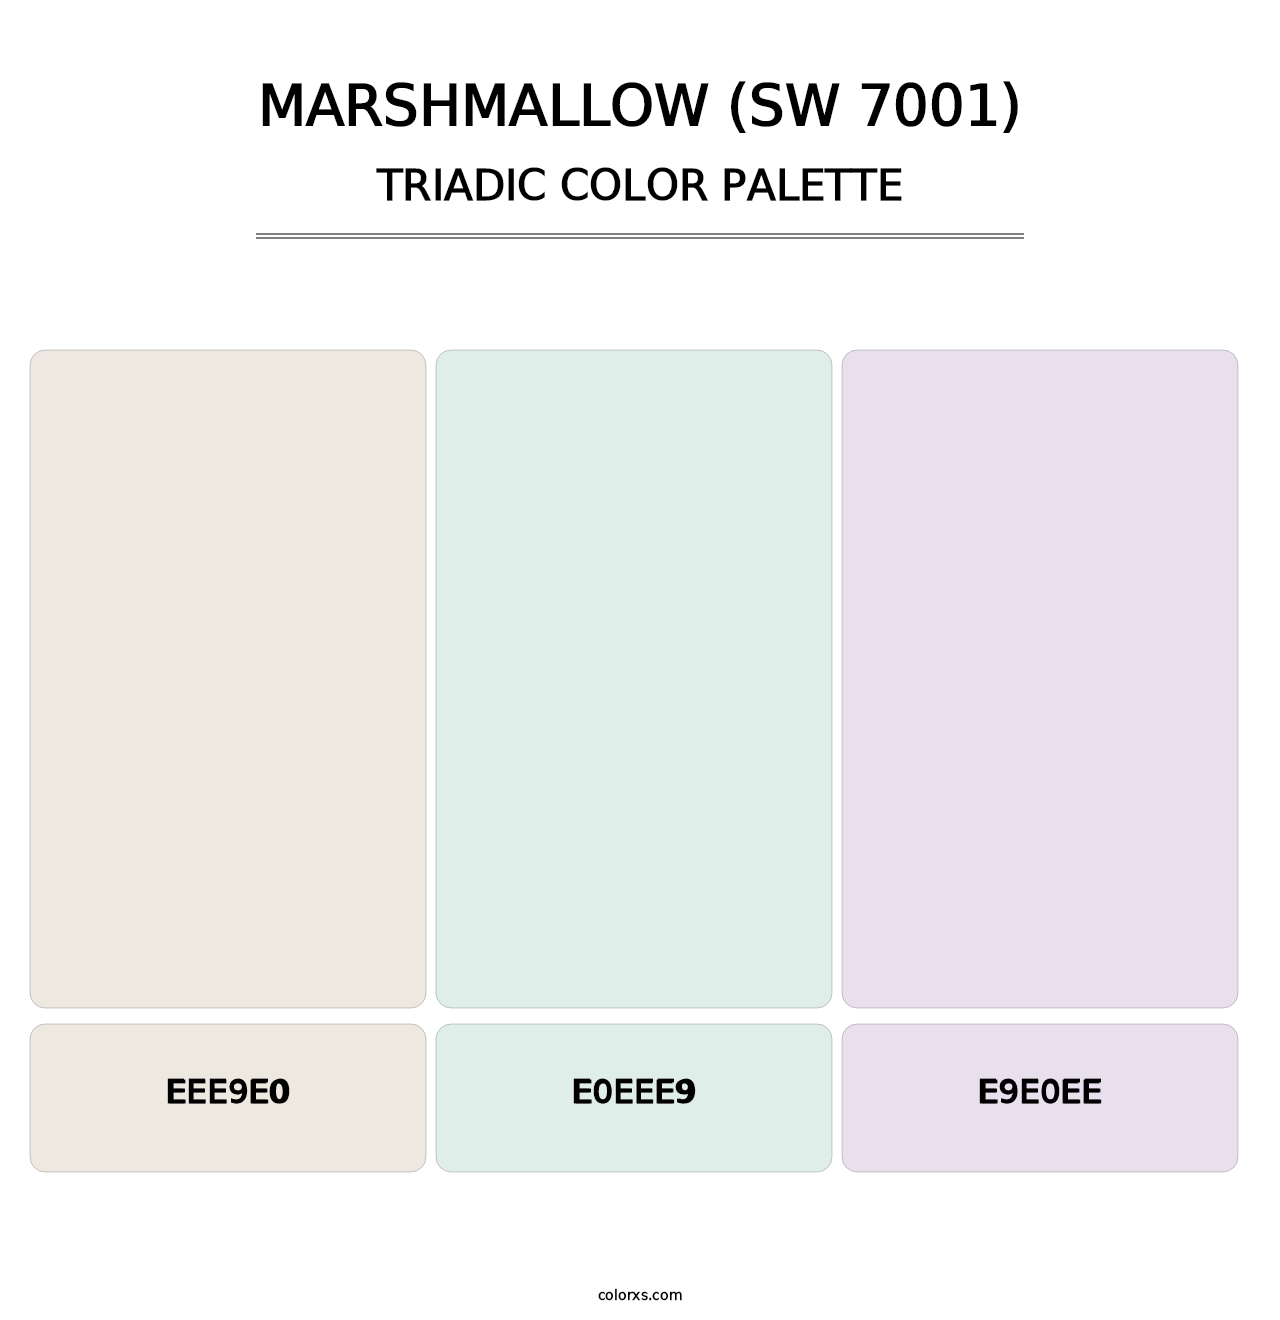 Marshmallow (SW 7001) - Triadic Color Palette